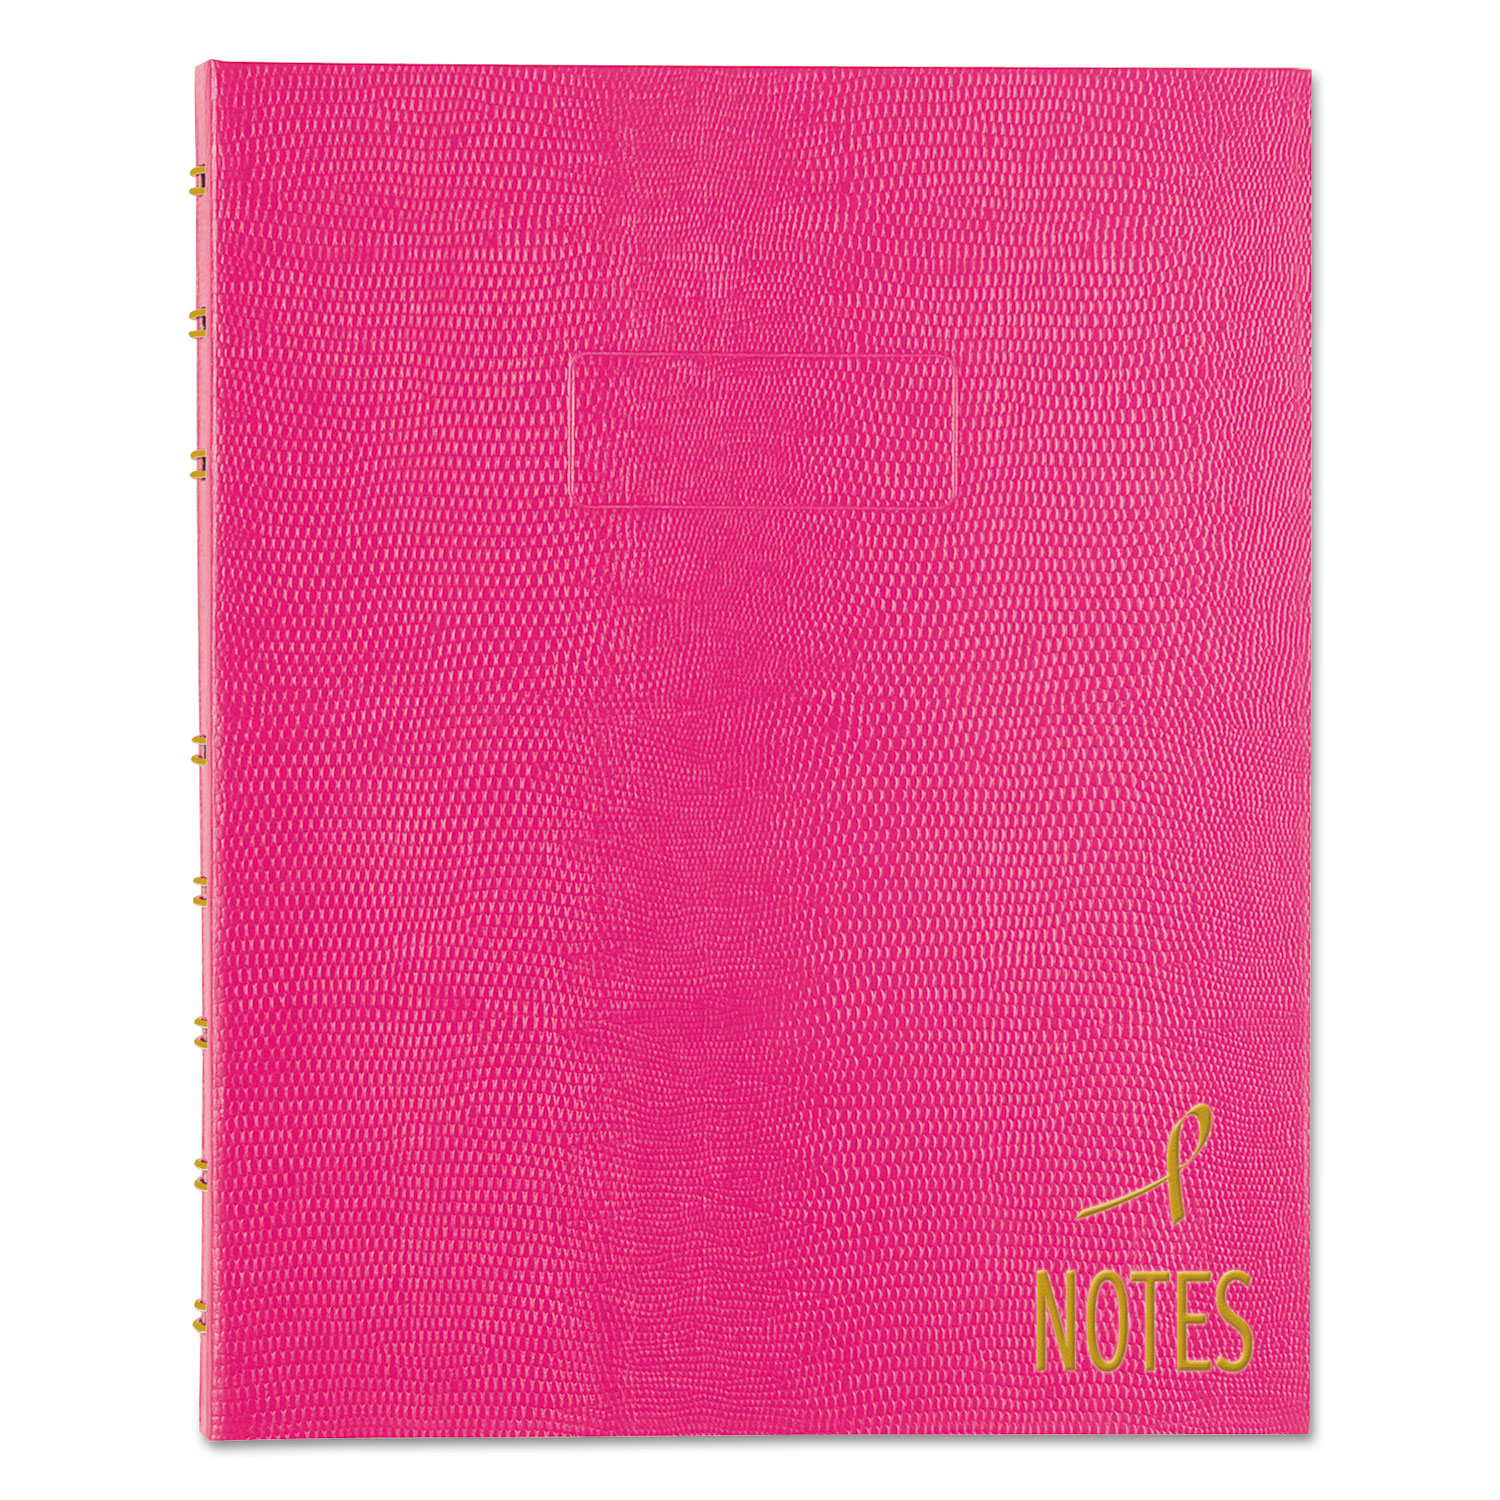  Blueline A7150.PNK4 NotePro Notebook, 1 Subject, Narrow Rule, Bright Pink Cover, 9.25 x 7.25, 75 Sheets (REDA7150PNK4) 